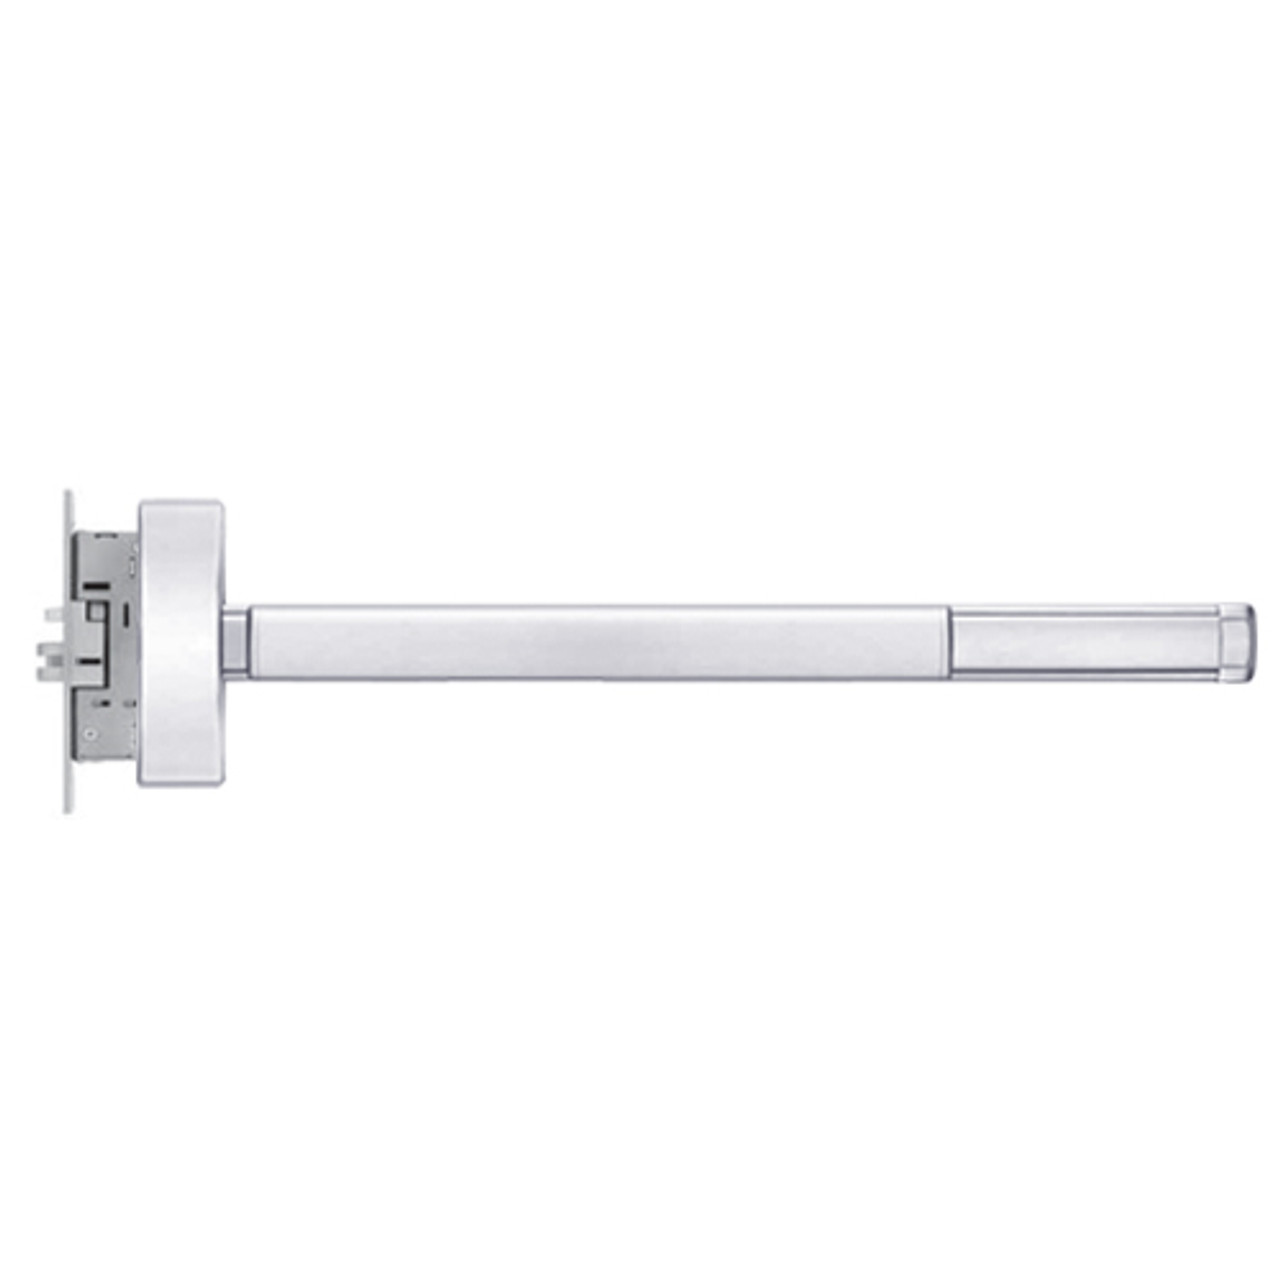 2305CD-LHR-625-36 PHI 2300 Series Non Fire Rated Apex Mortise Exit Device Prepped for Key Controls Thumb Piece with Cylinder Dogging in Bright Chrome Finish